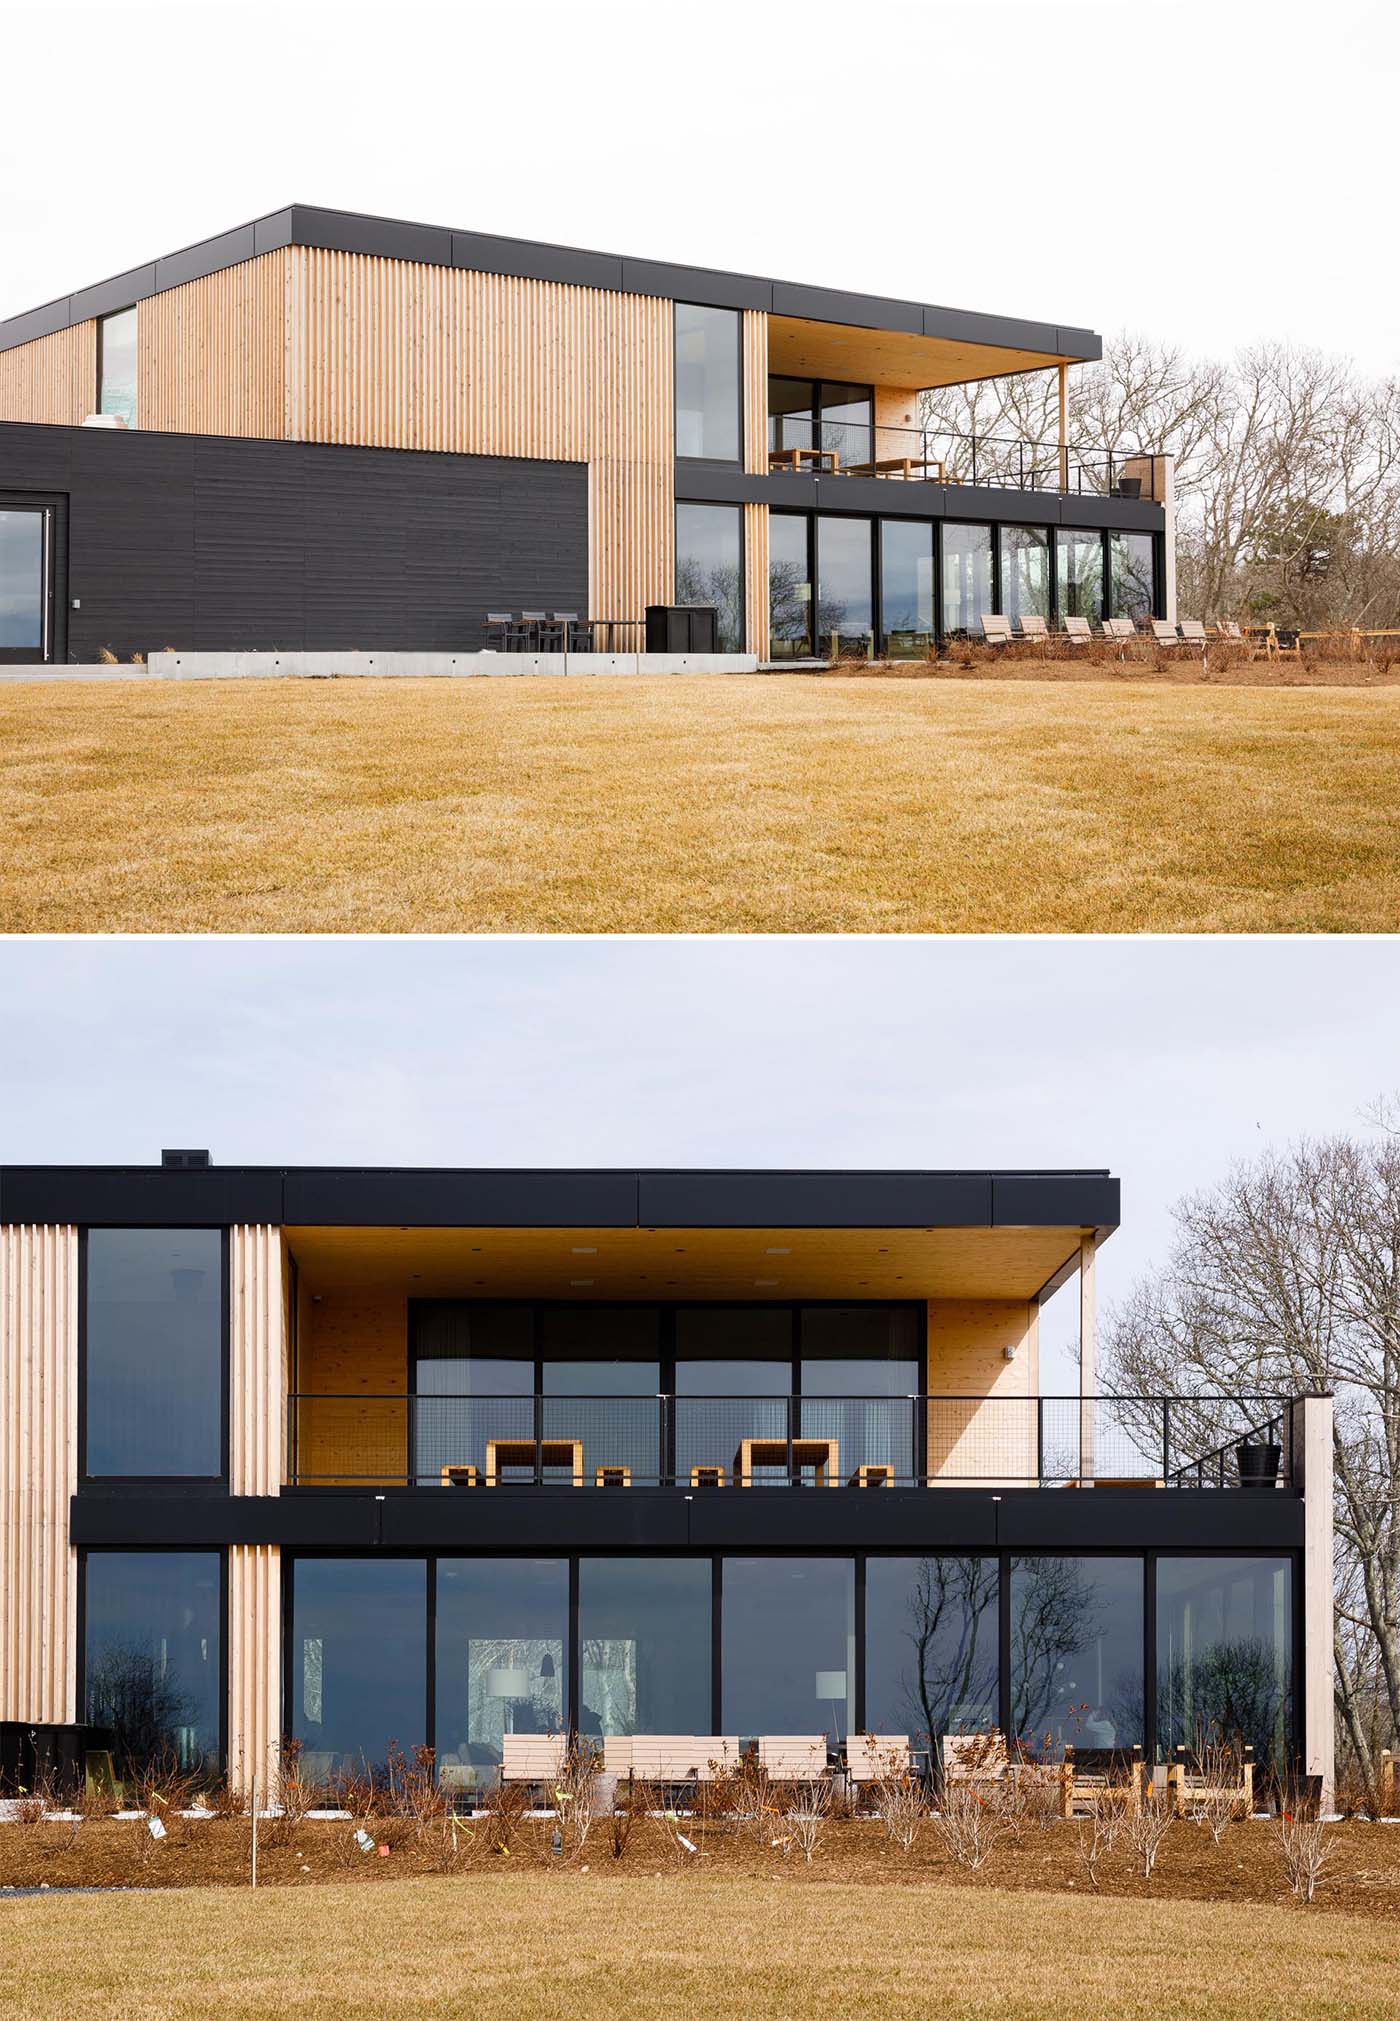 This modern clubhouse building has a wood exterior, with both a natural finish and a darker finish, as well as large expanses of windows.